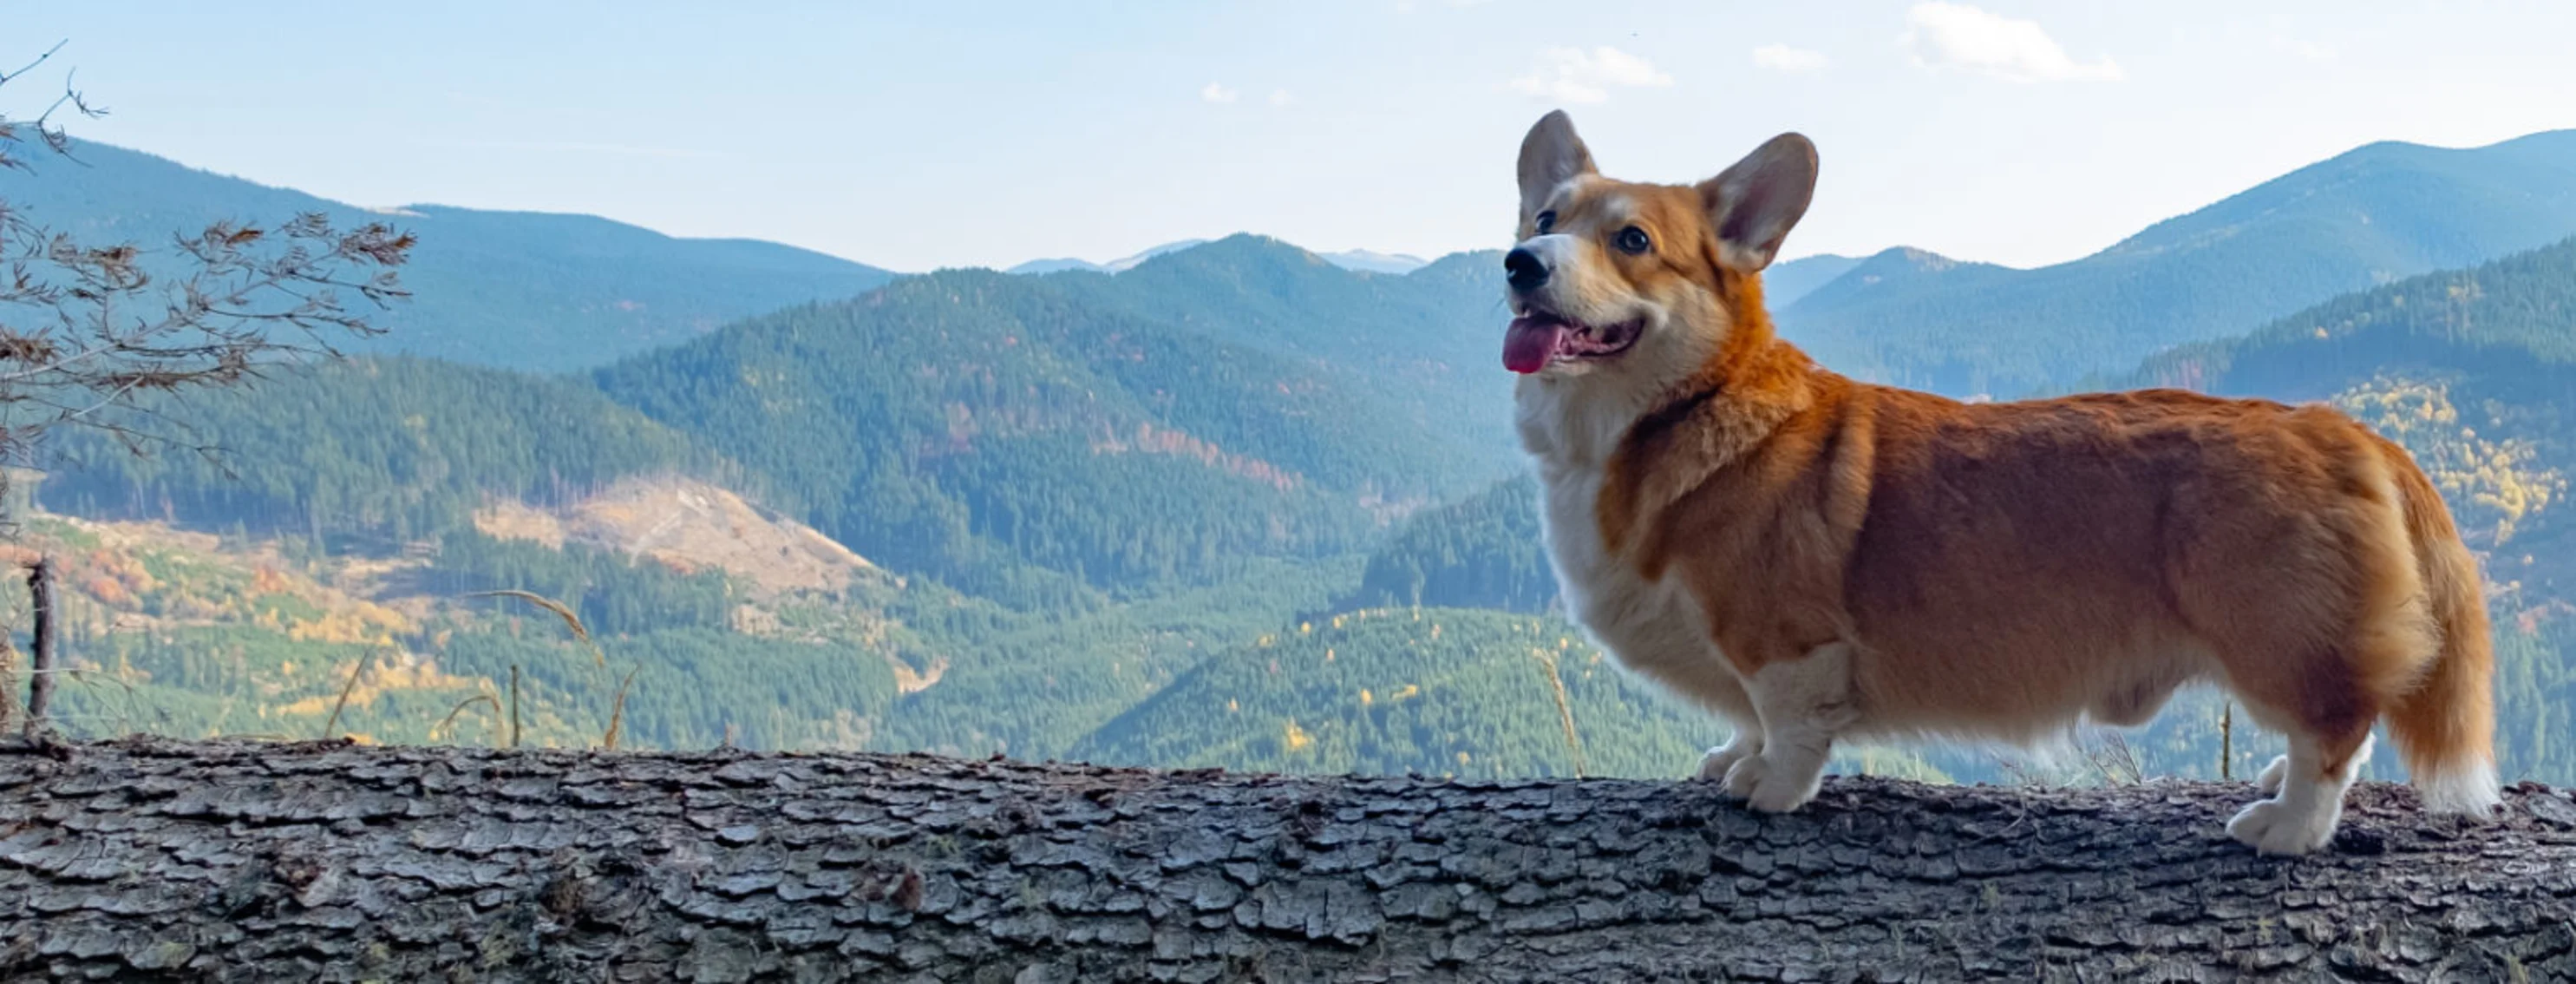 Corgi Standing on a Log in front of Mountains